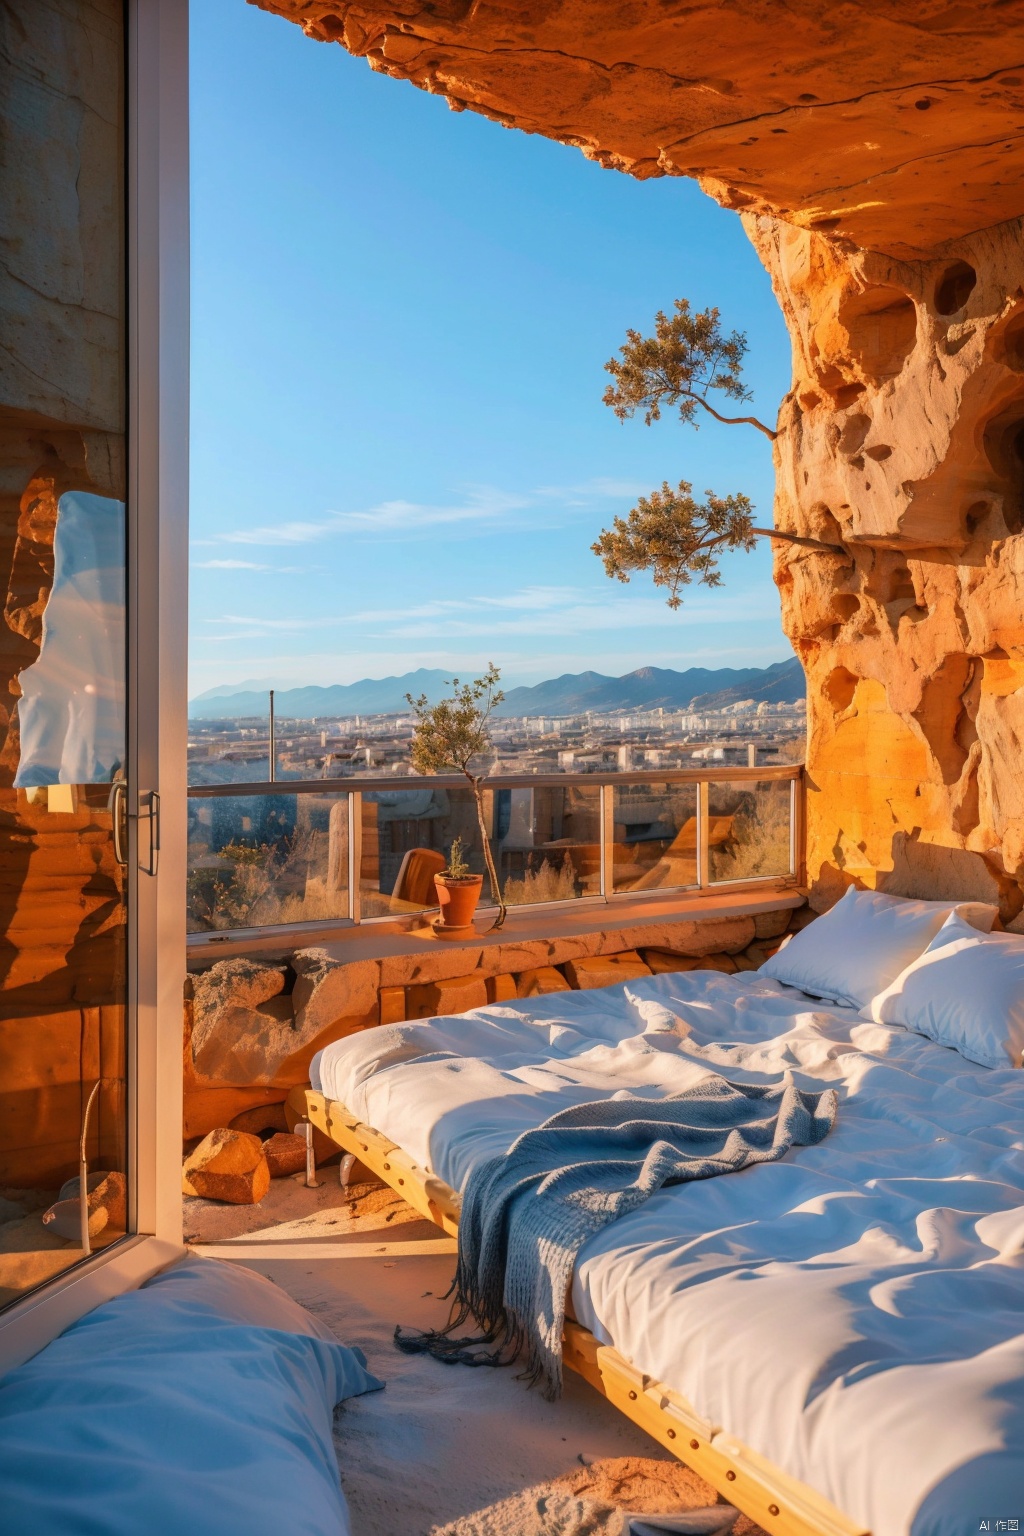  Architectural rendering, architectural design, Rock architecture, Rock buildings, sky, day, tree, blue sky, no humans, scenery, building, lighting, balcony, French window, room, city